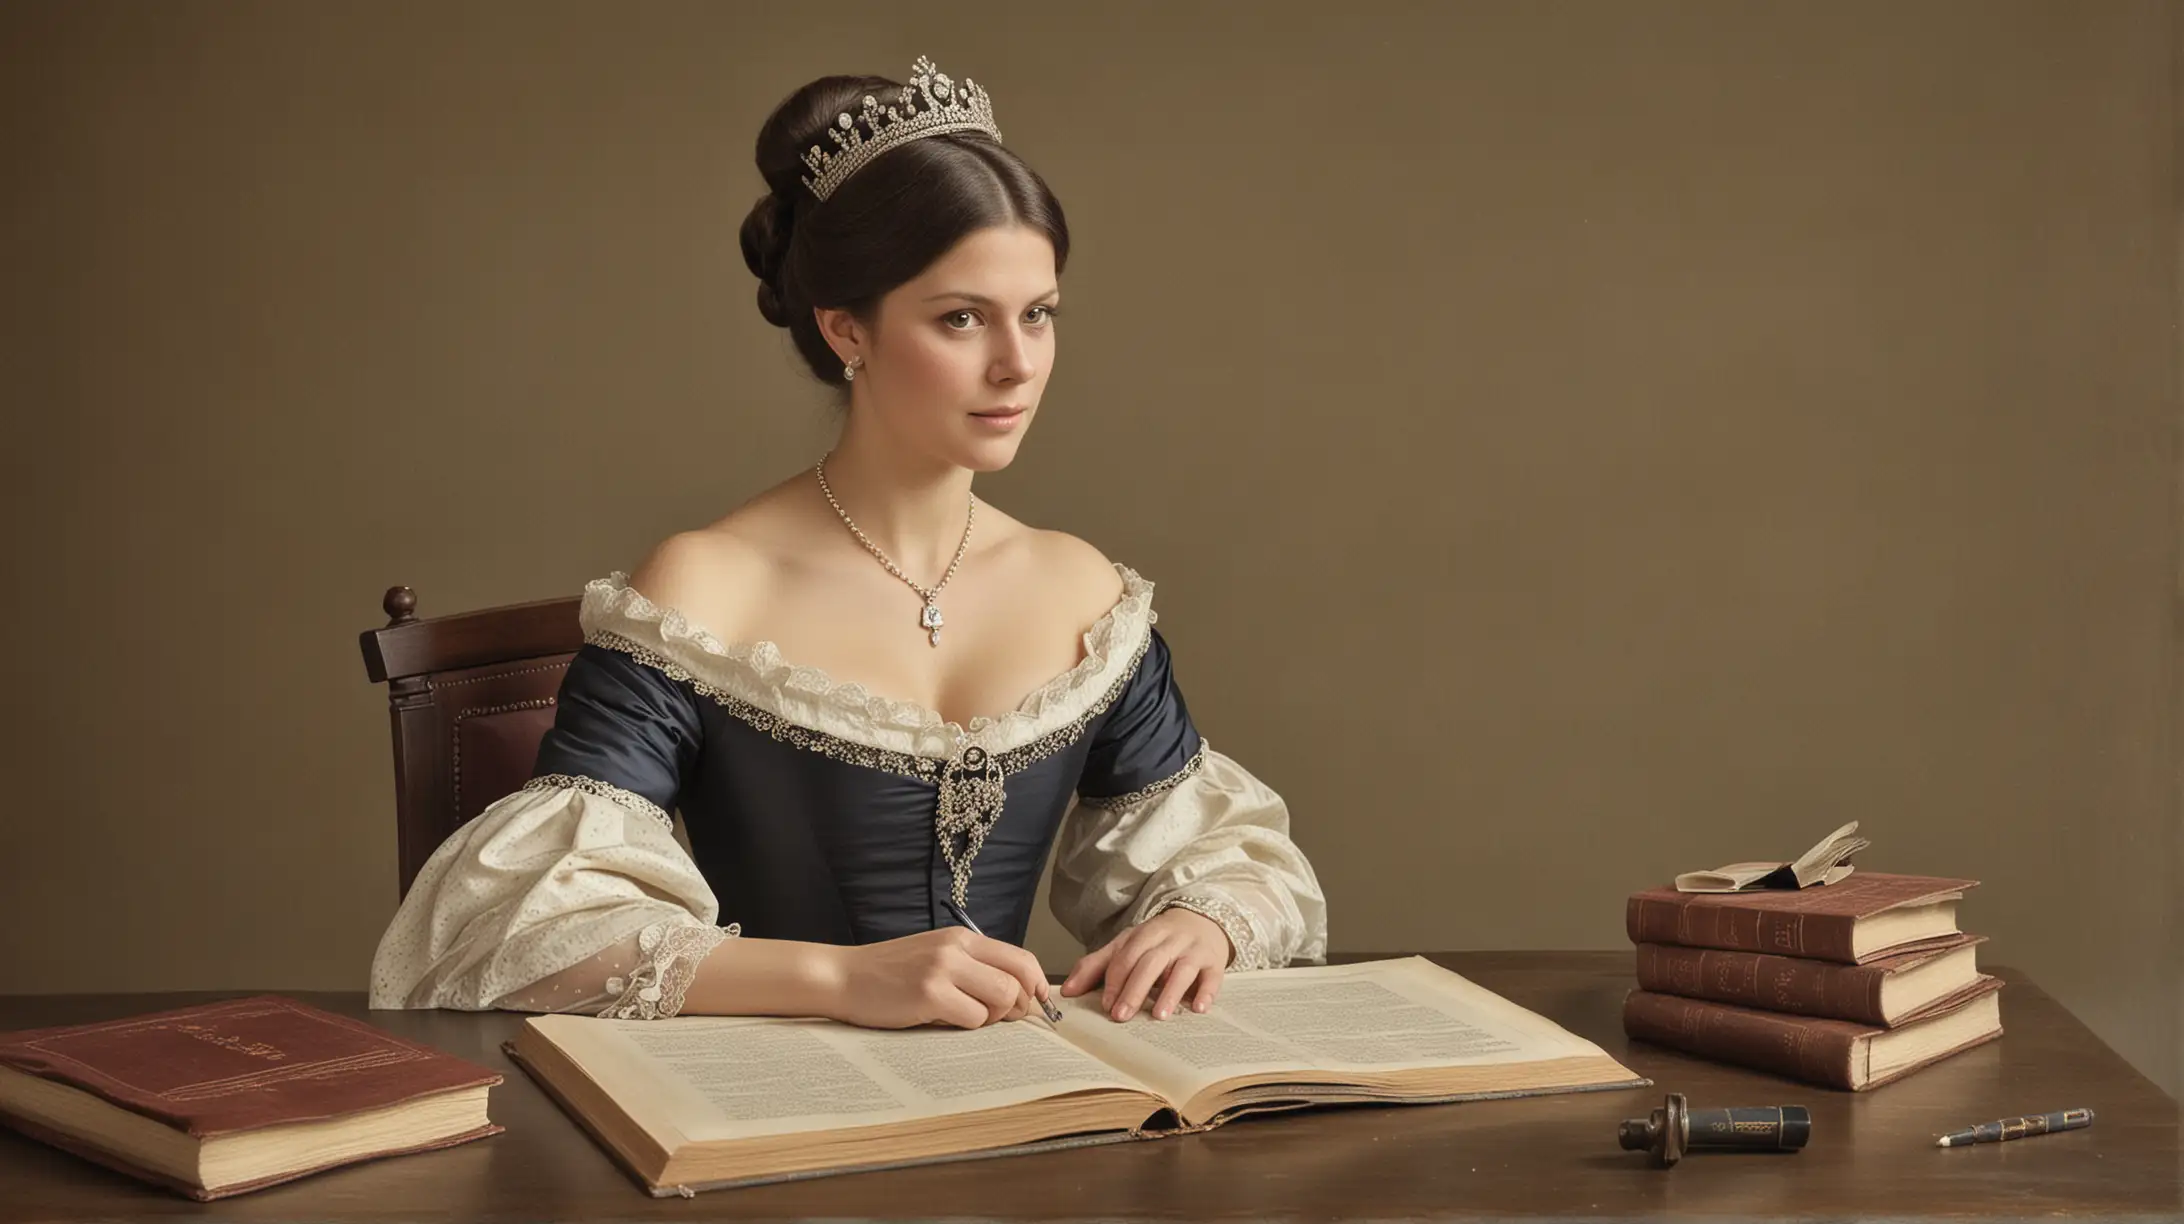 Princess Victoria Engaged in Academic Pursuits